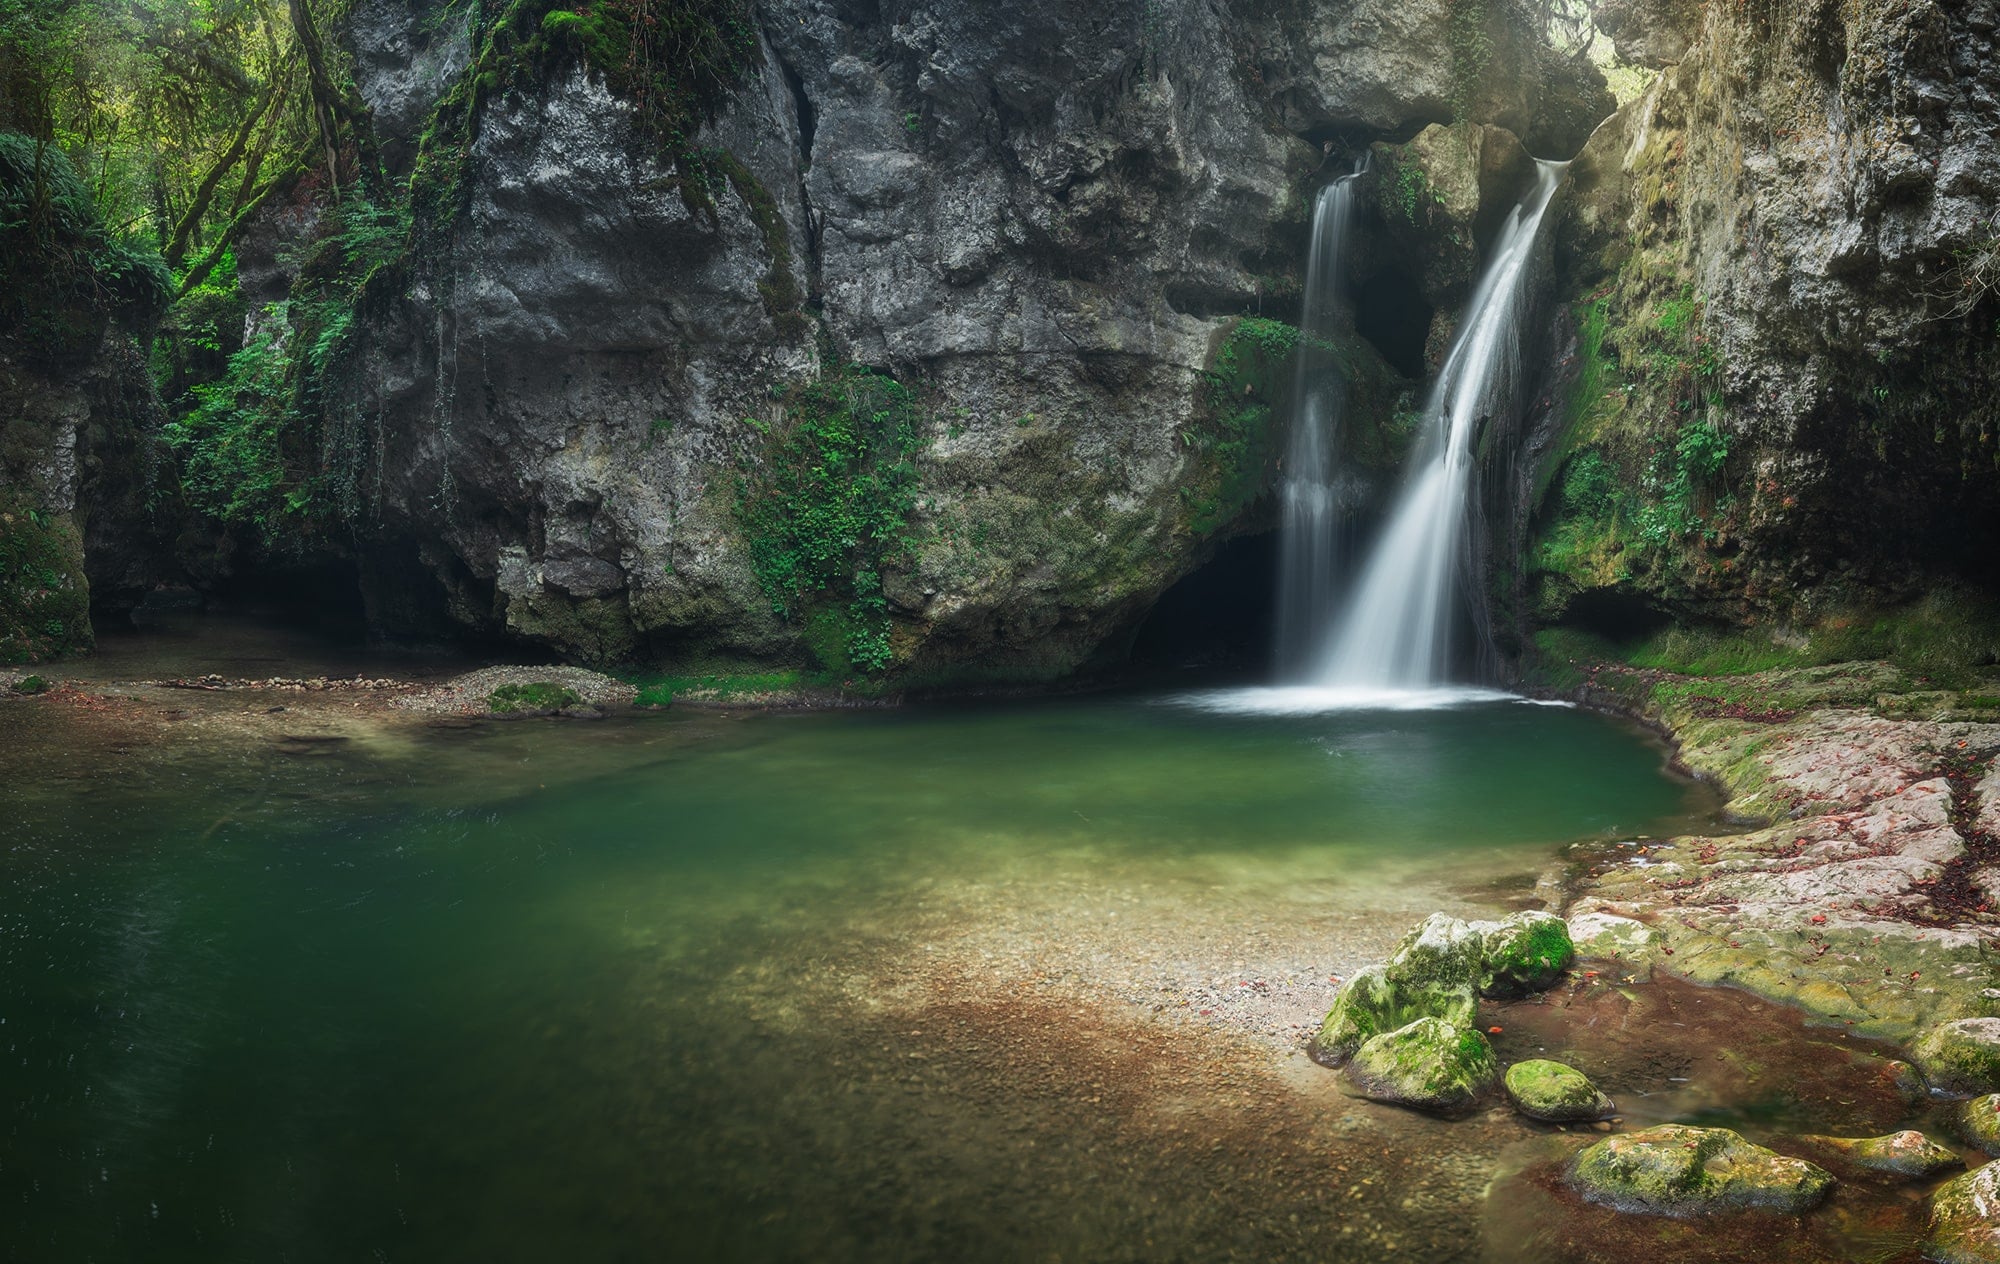 Step into a fairytale realm with this mesmerizing long exposure landscape photograph, capturing the enchanting beauty of the Tine of Conflens waterfall in Orbe, Switzerland. Nestled amidst a fairytale forest, this picturesque scene transports viewers to a world of wonder and tranquility. Immerse yourself in the serene flow of water and the lush greenery surrounding the waterfall. Experience the magic of nature through the lens of landscape photography in this captivating portfolio.